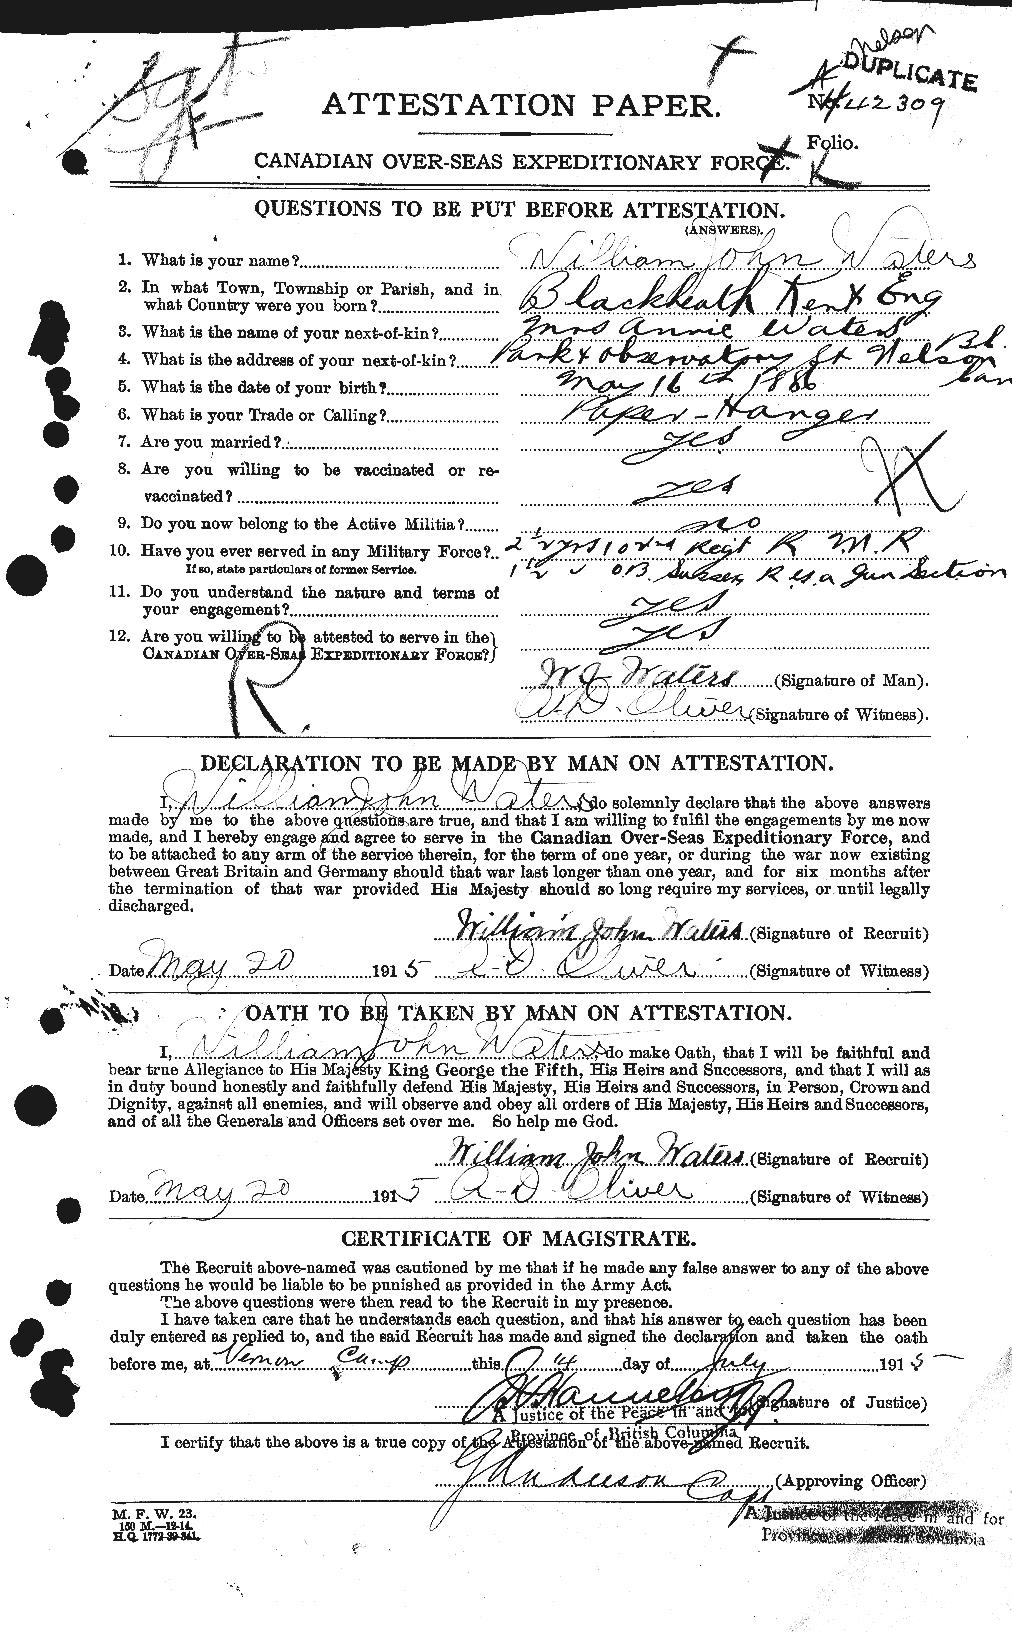 Personnel Records of the First World War - CEF 658286a